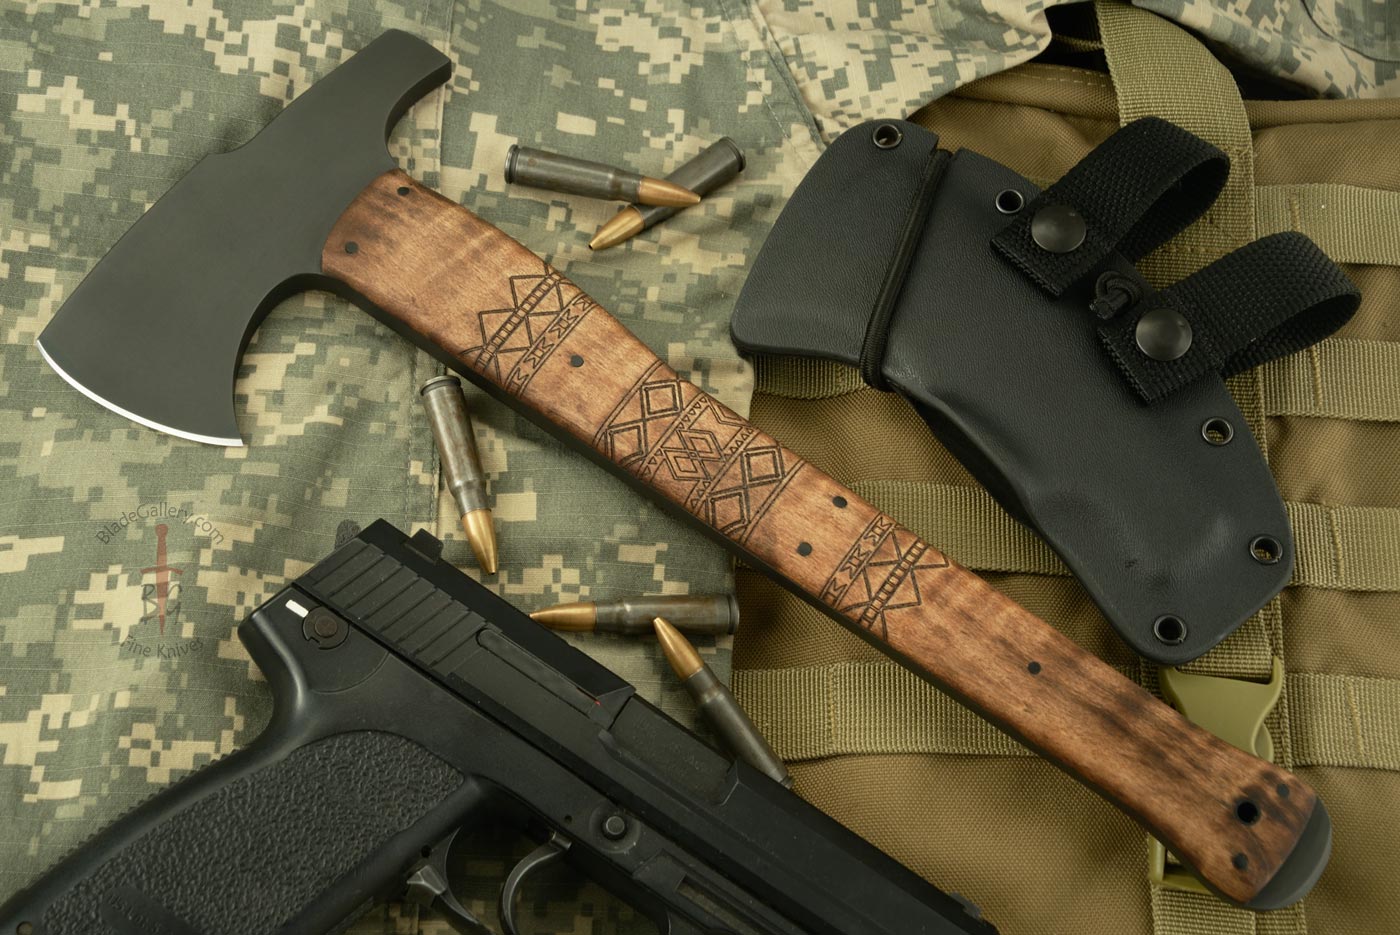 Hammer Combat Axe with Maple, Tribal Markings